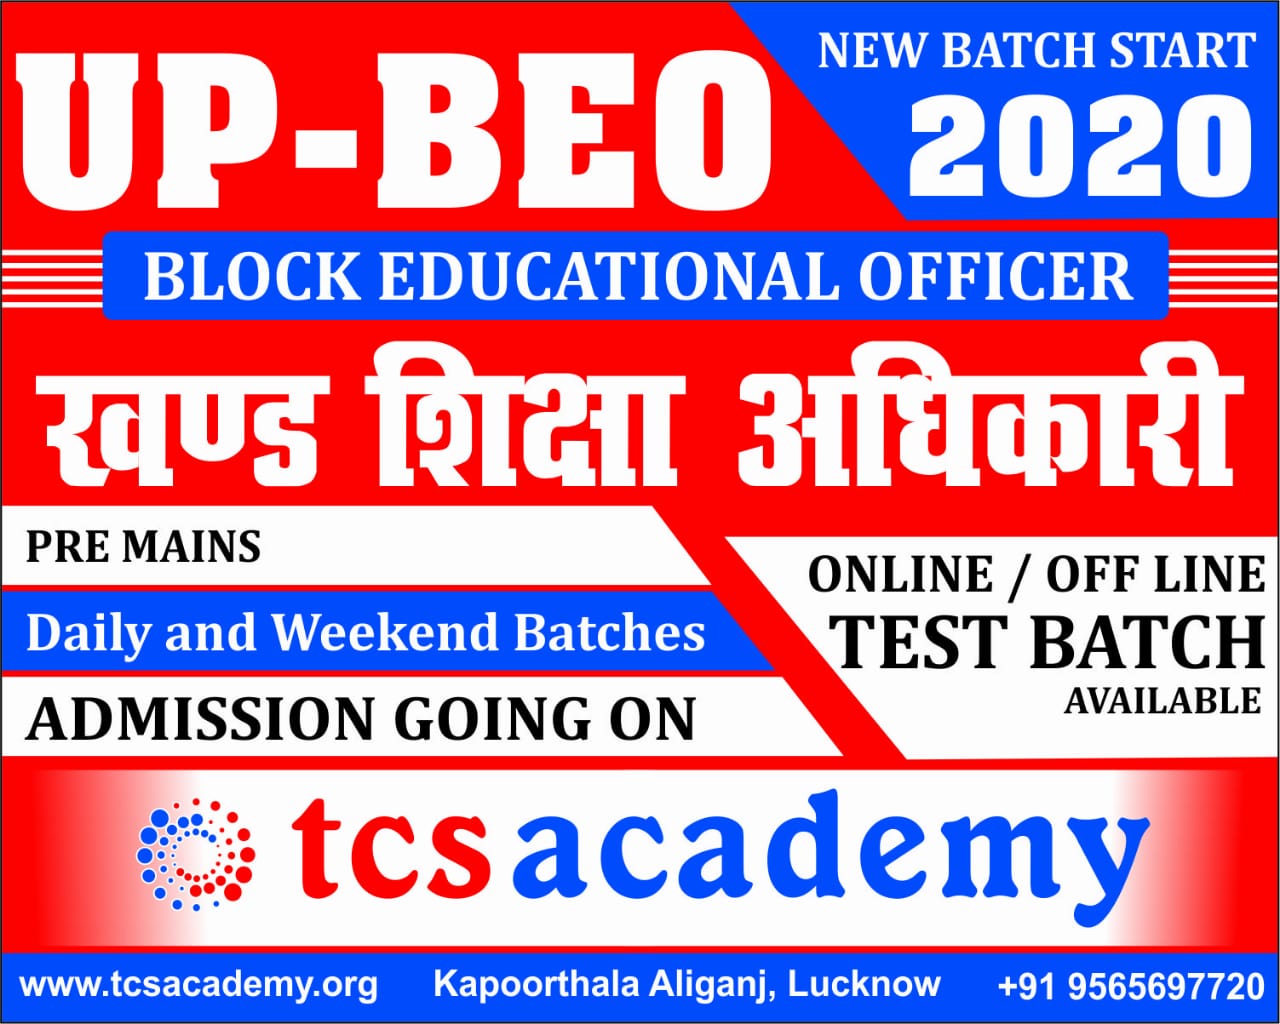 UP BEO EXAM STUDY MATERIAL NOTES TEST SERIES - TCS ACADEMY